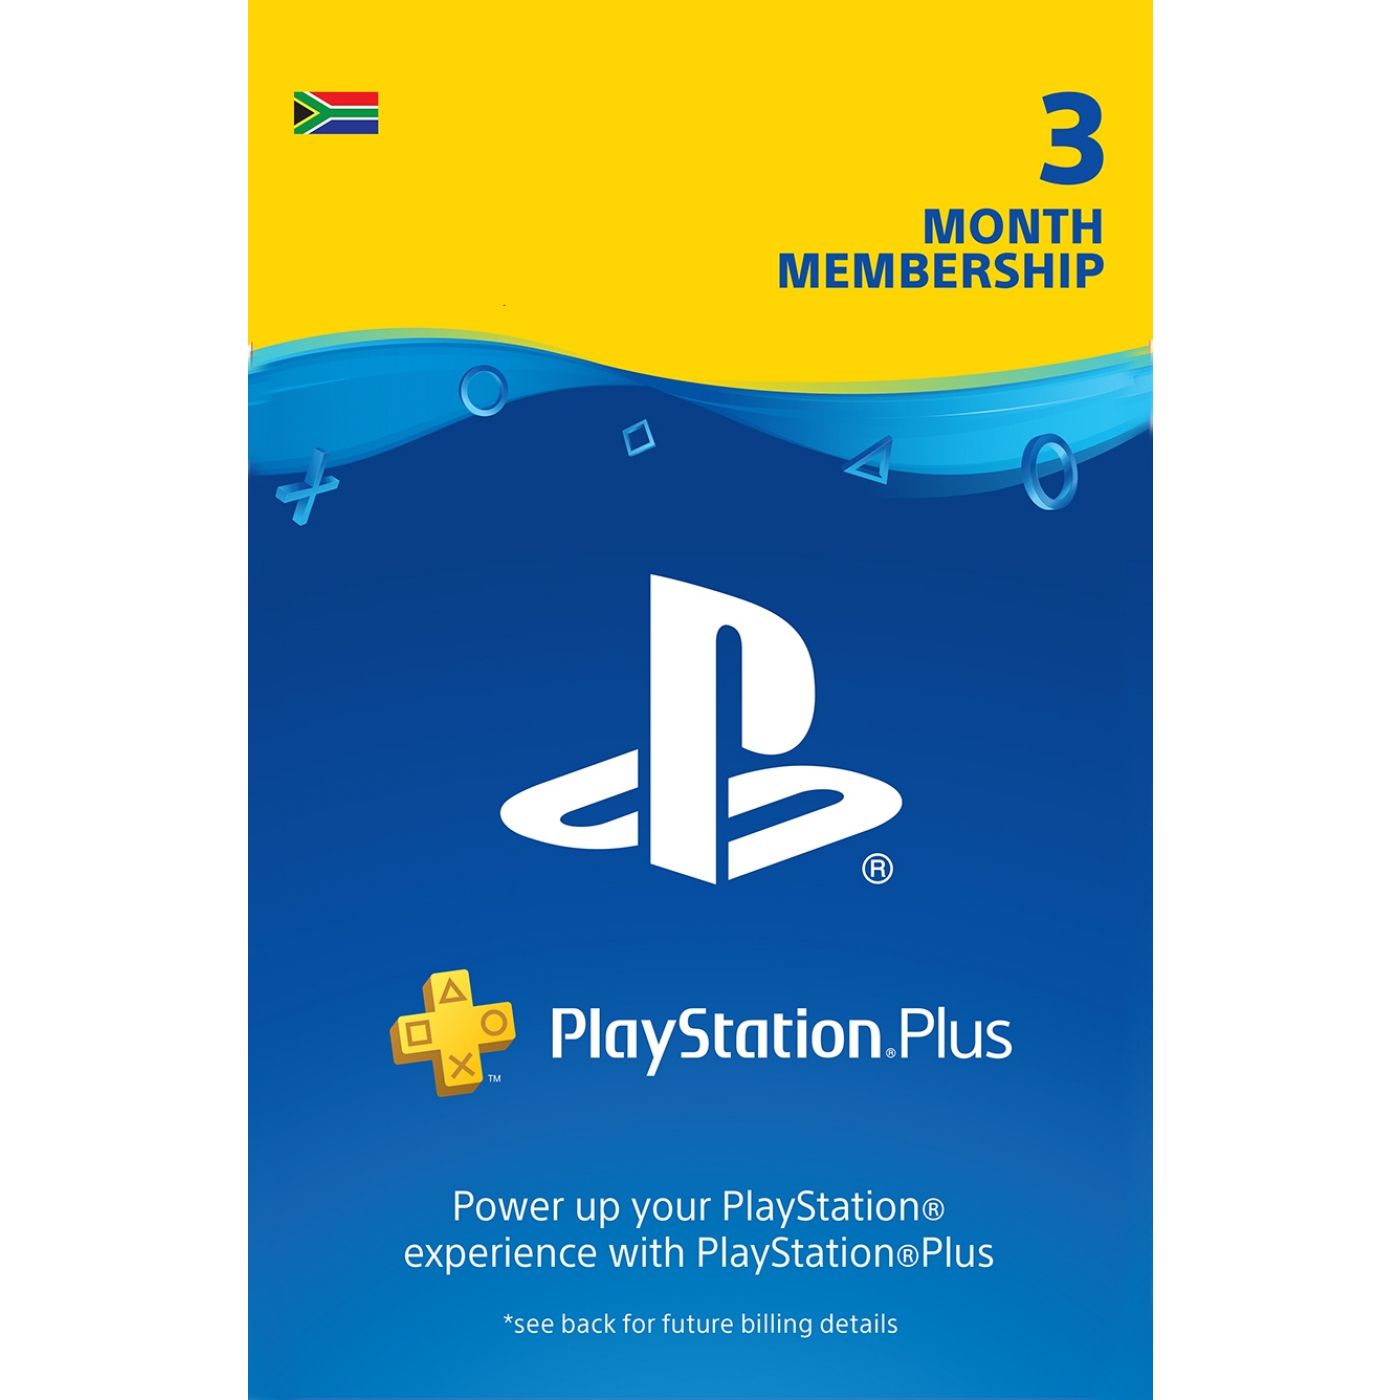 free games on playstation network